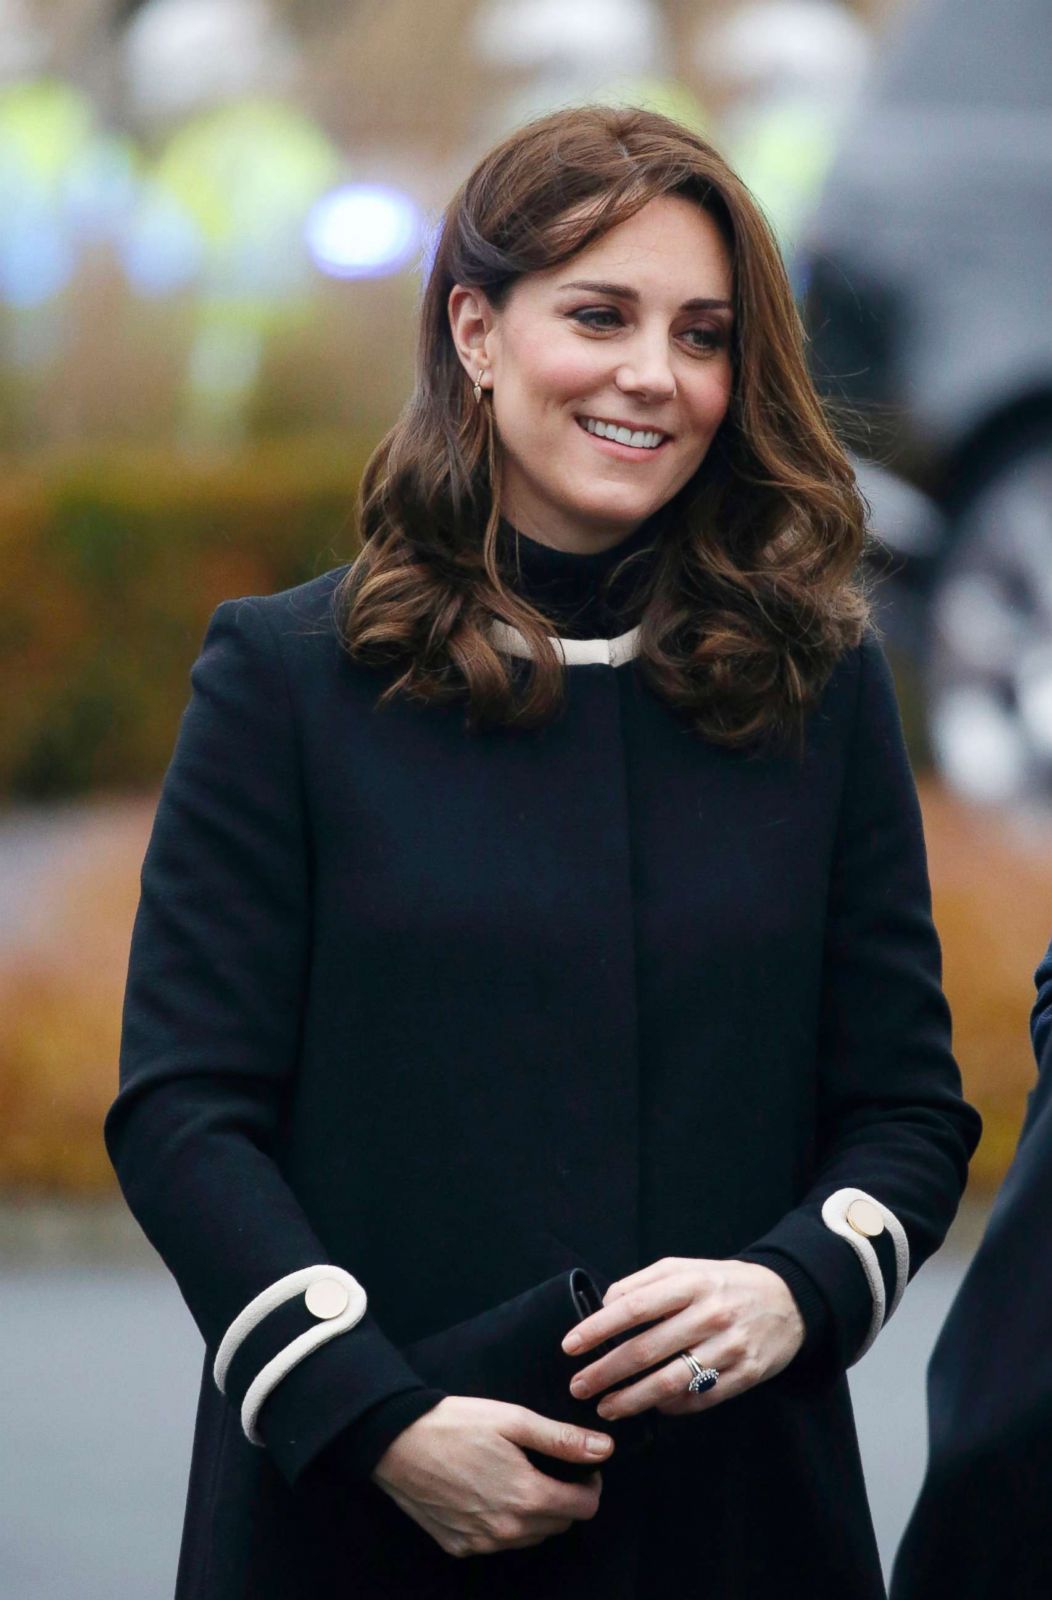 This is a blessing: Princess Kate’s health report shows improvement ...